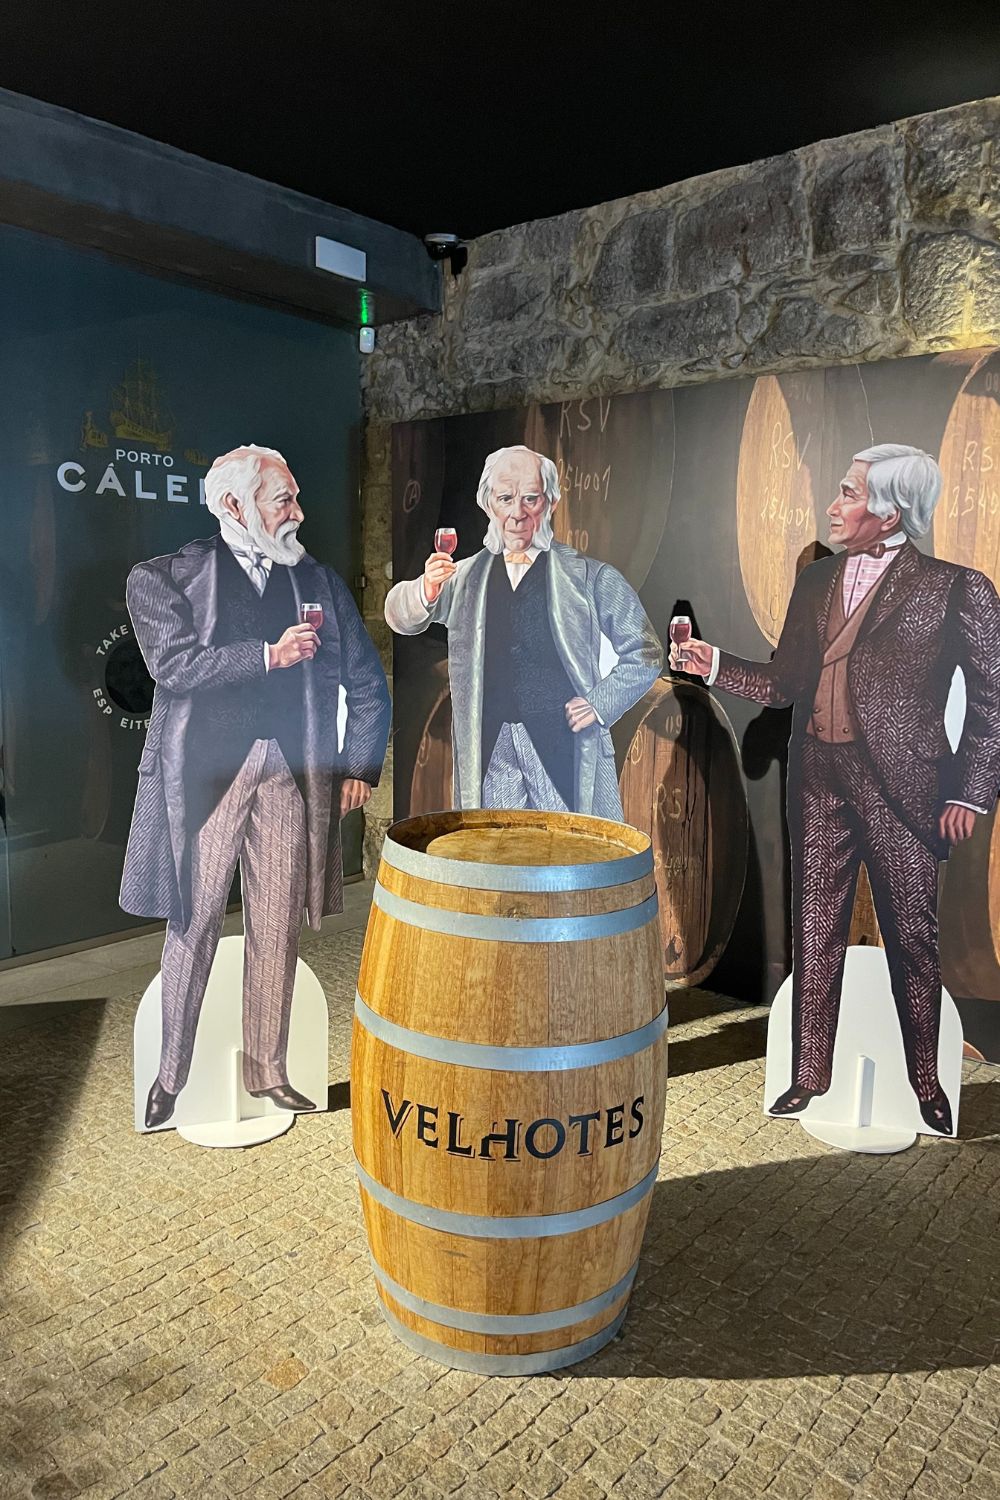 Life-size cardboard cutouts of historical figures holding wine glasses, standing next to a wooden port wine barrel, inside a winery exhibition.